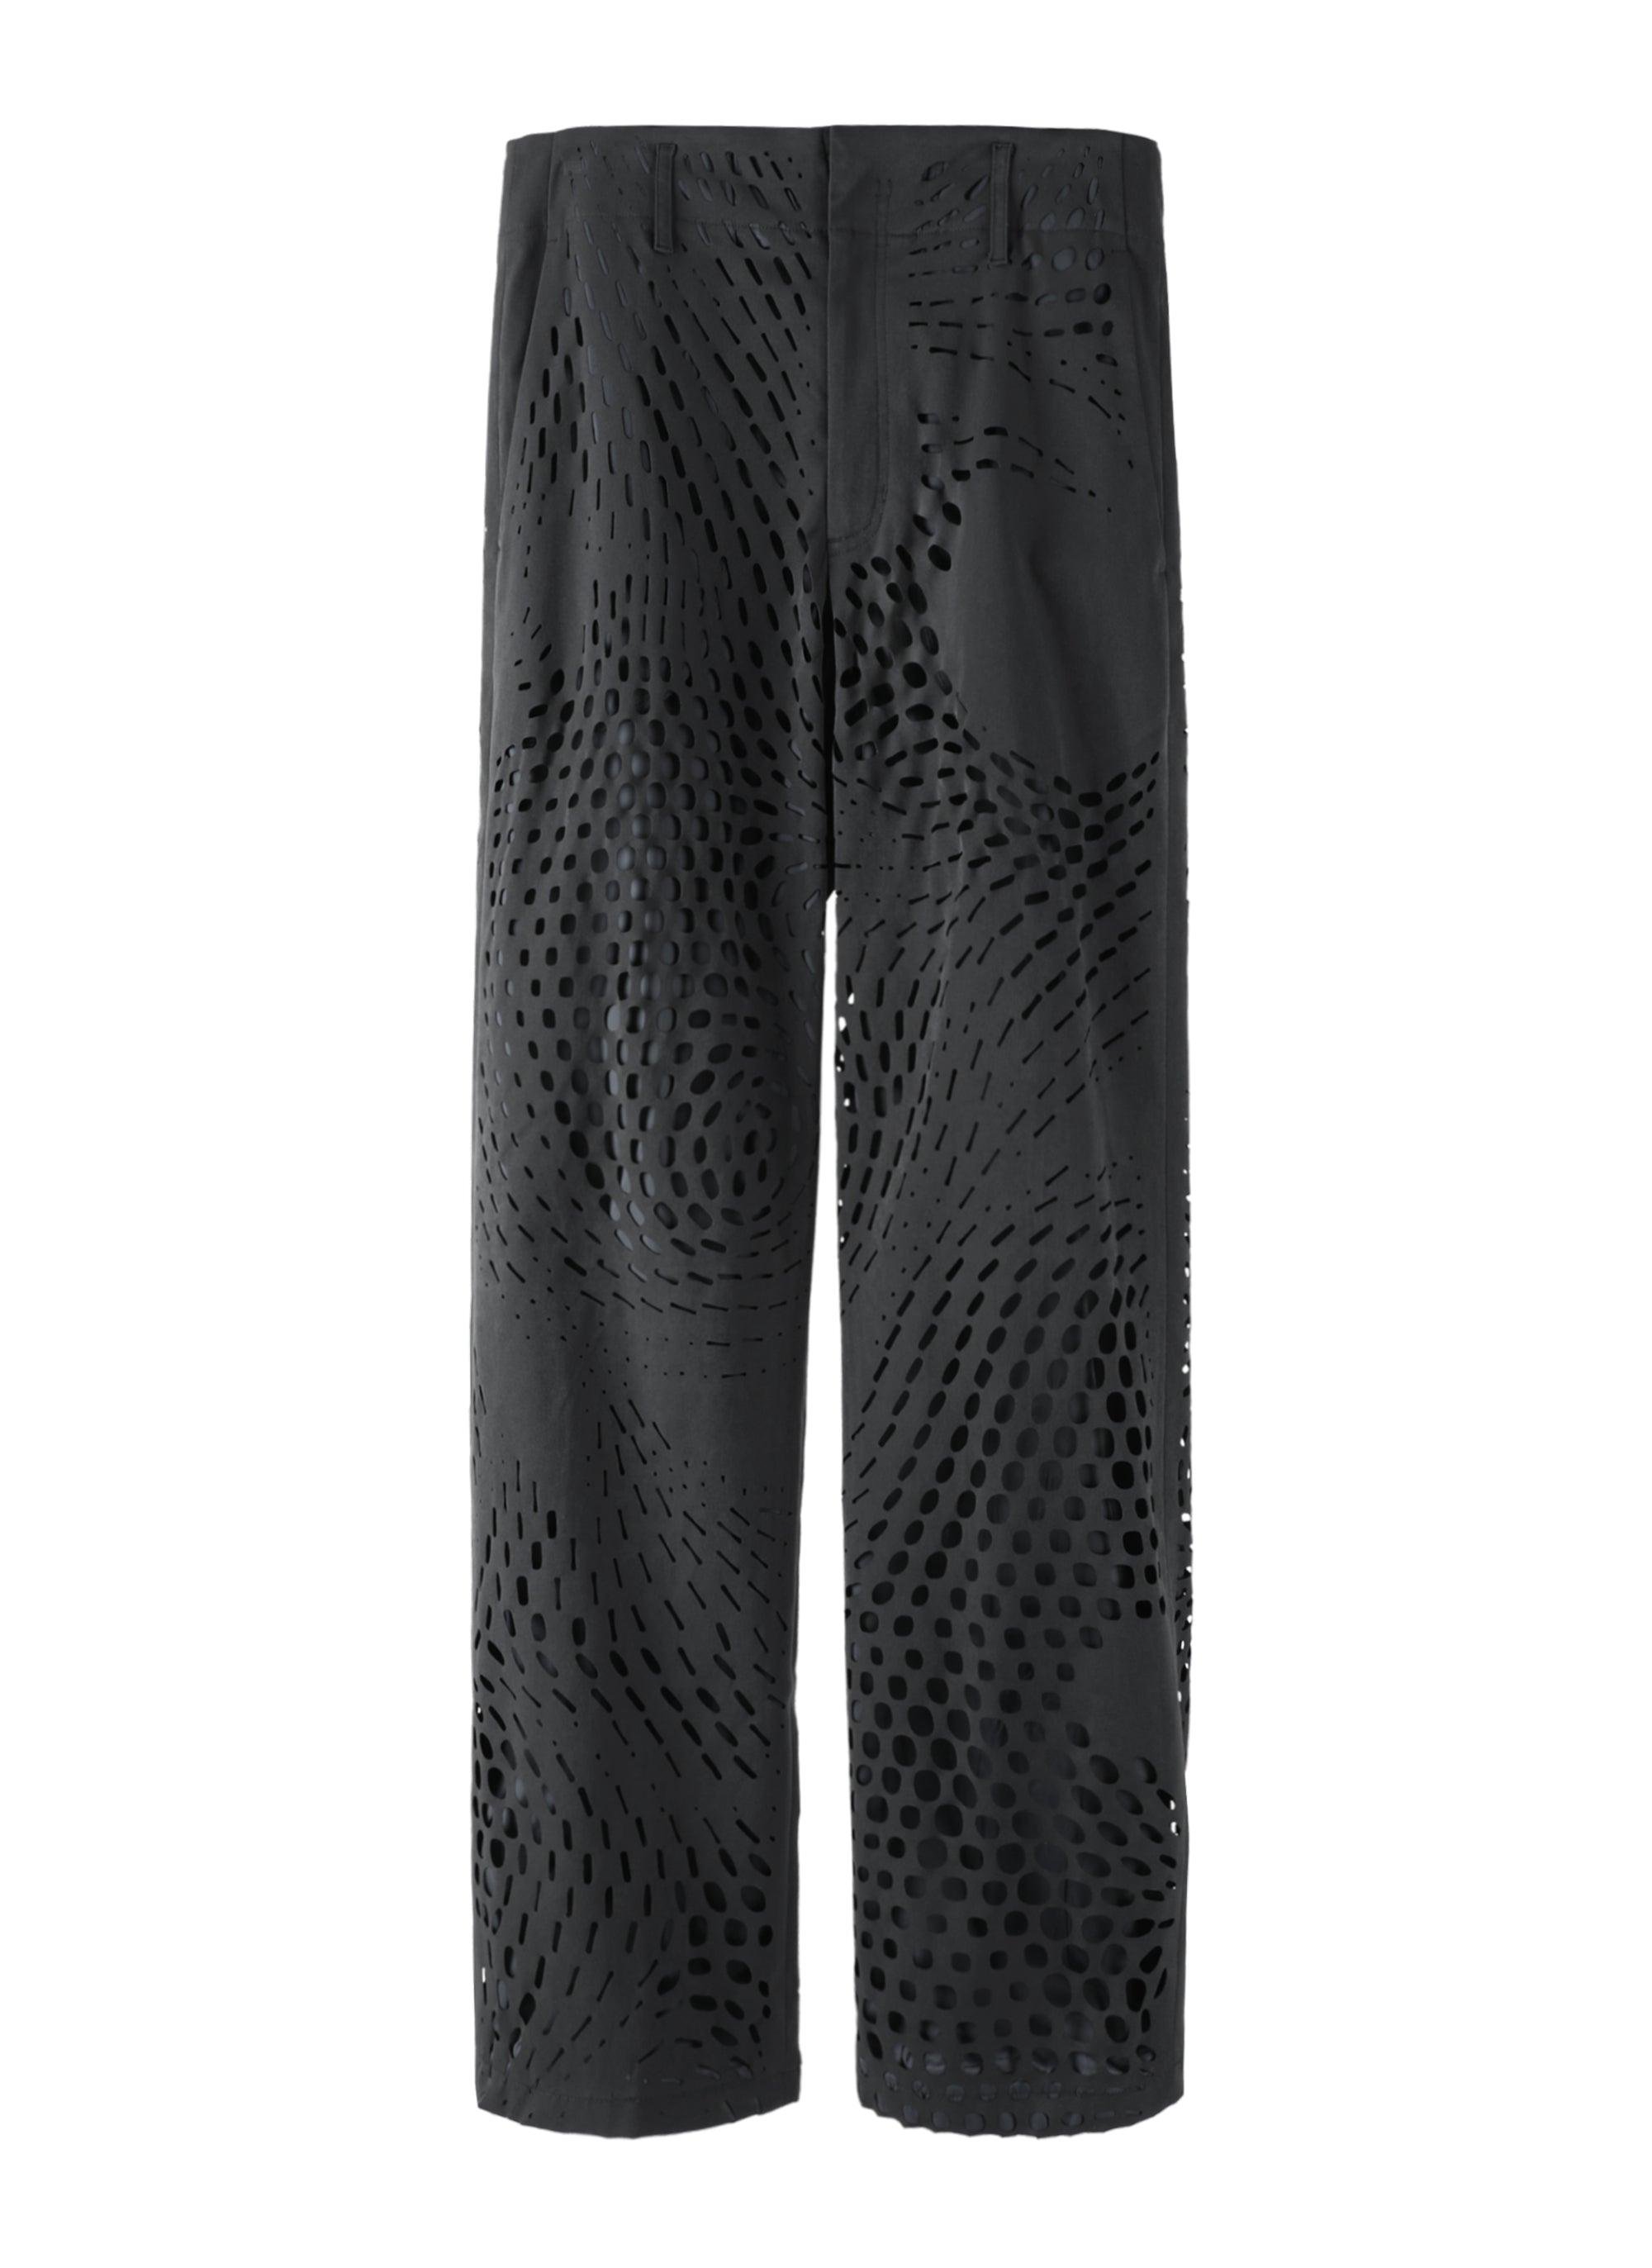 POST ARCHIVE FACTION - 5.1 Trousers Left -  (Black) by POST ARCHIVE FACTION (PAF)